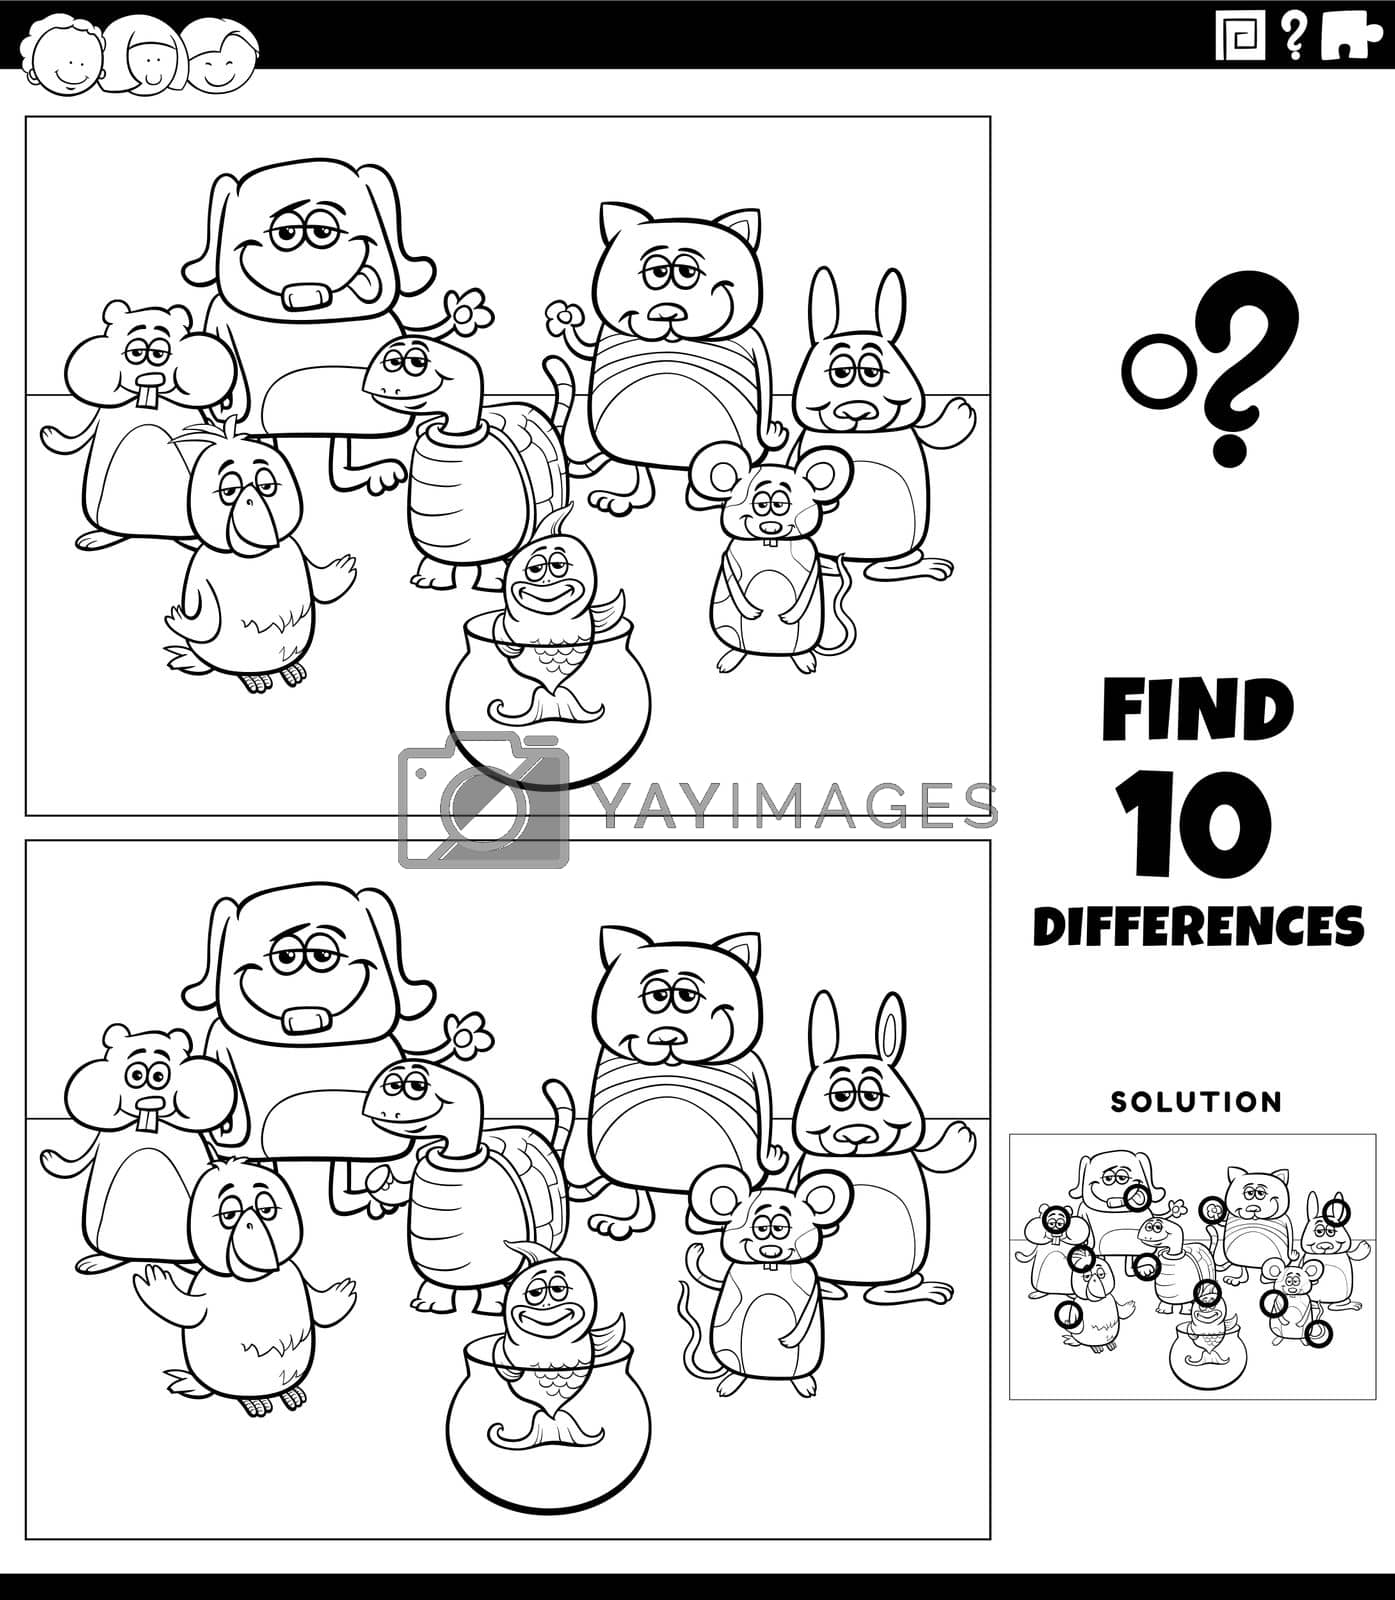 Royalty free image of differences game with cartoon pets coloring page by izakowski